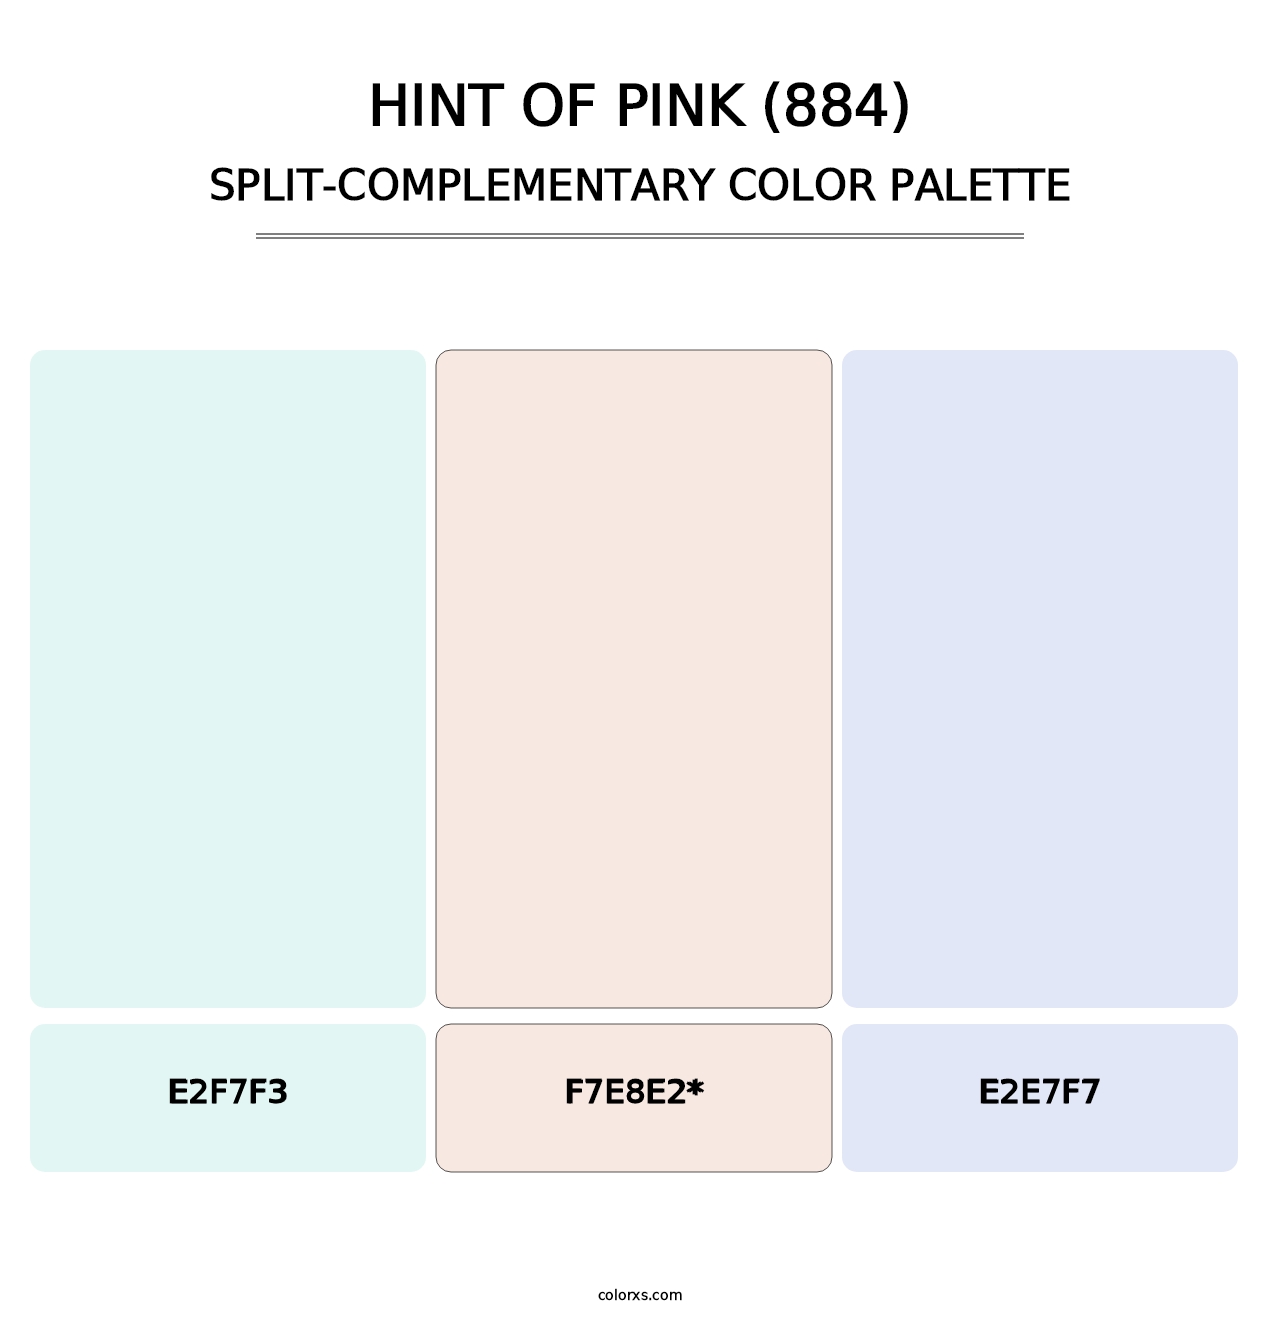 Hint of Pink (884) - Split-Complementary Color Palette